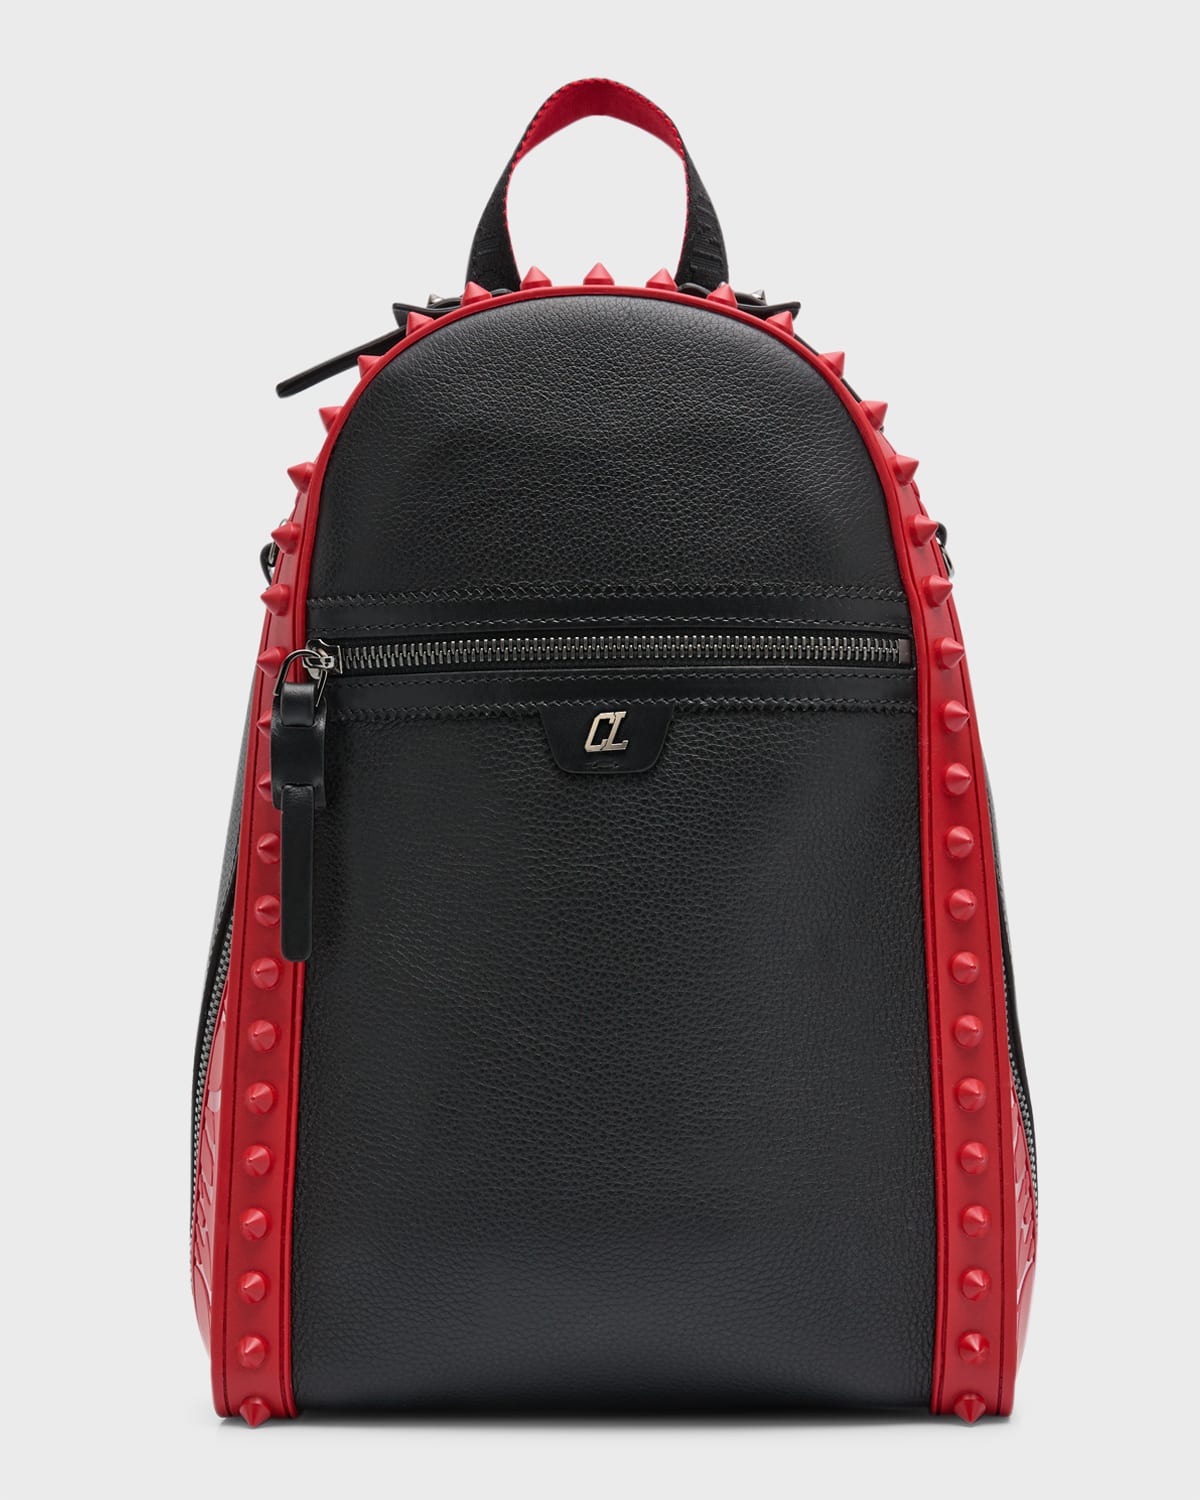 Christian Louboutin Men's Spiked Red Sole Leather Backpack | Neiman Marcus